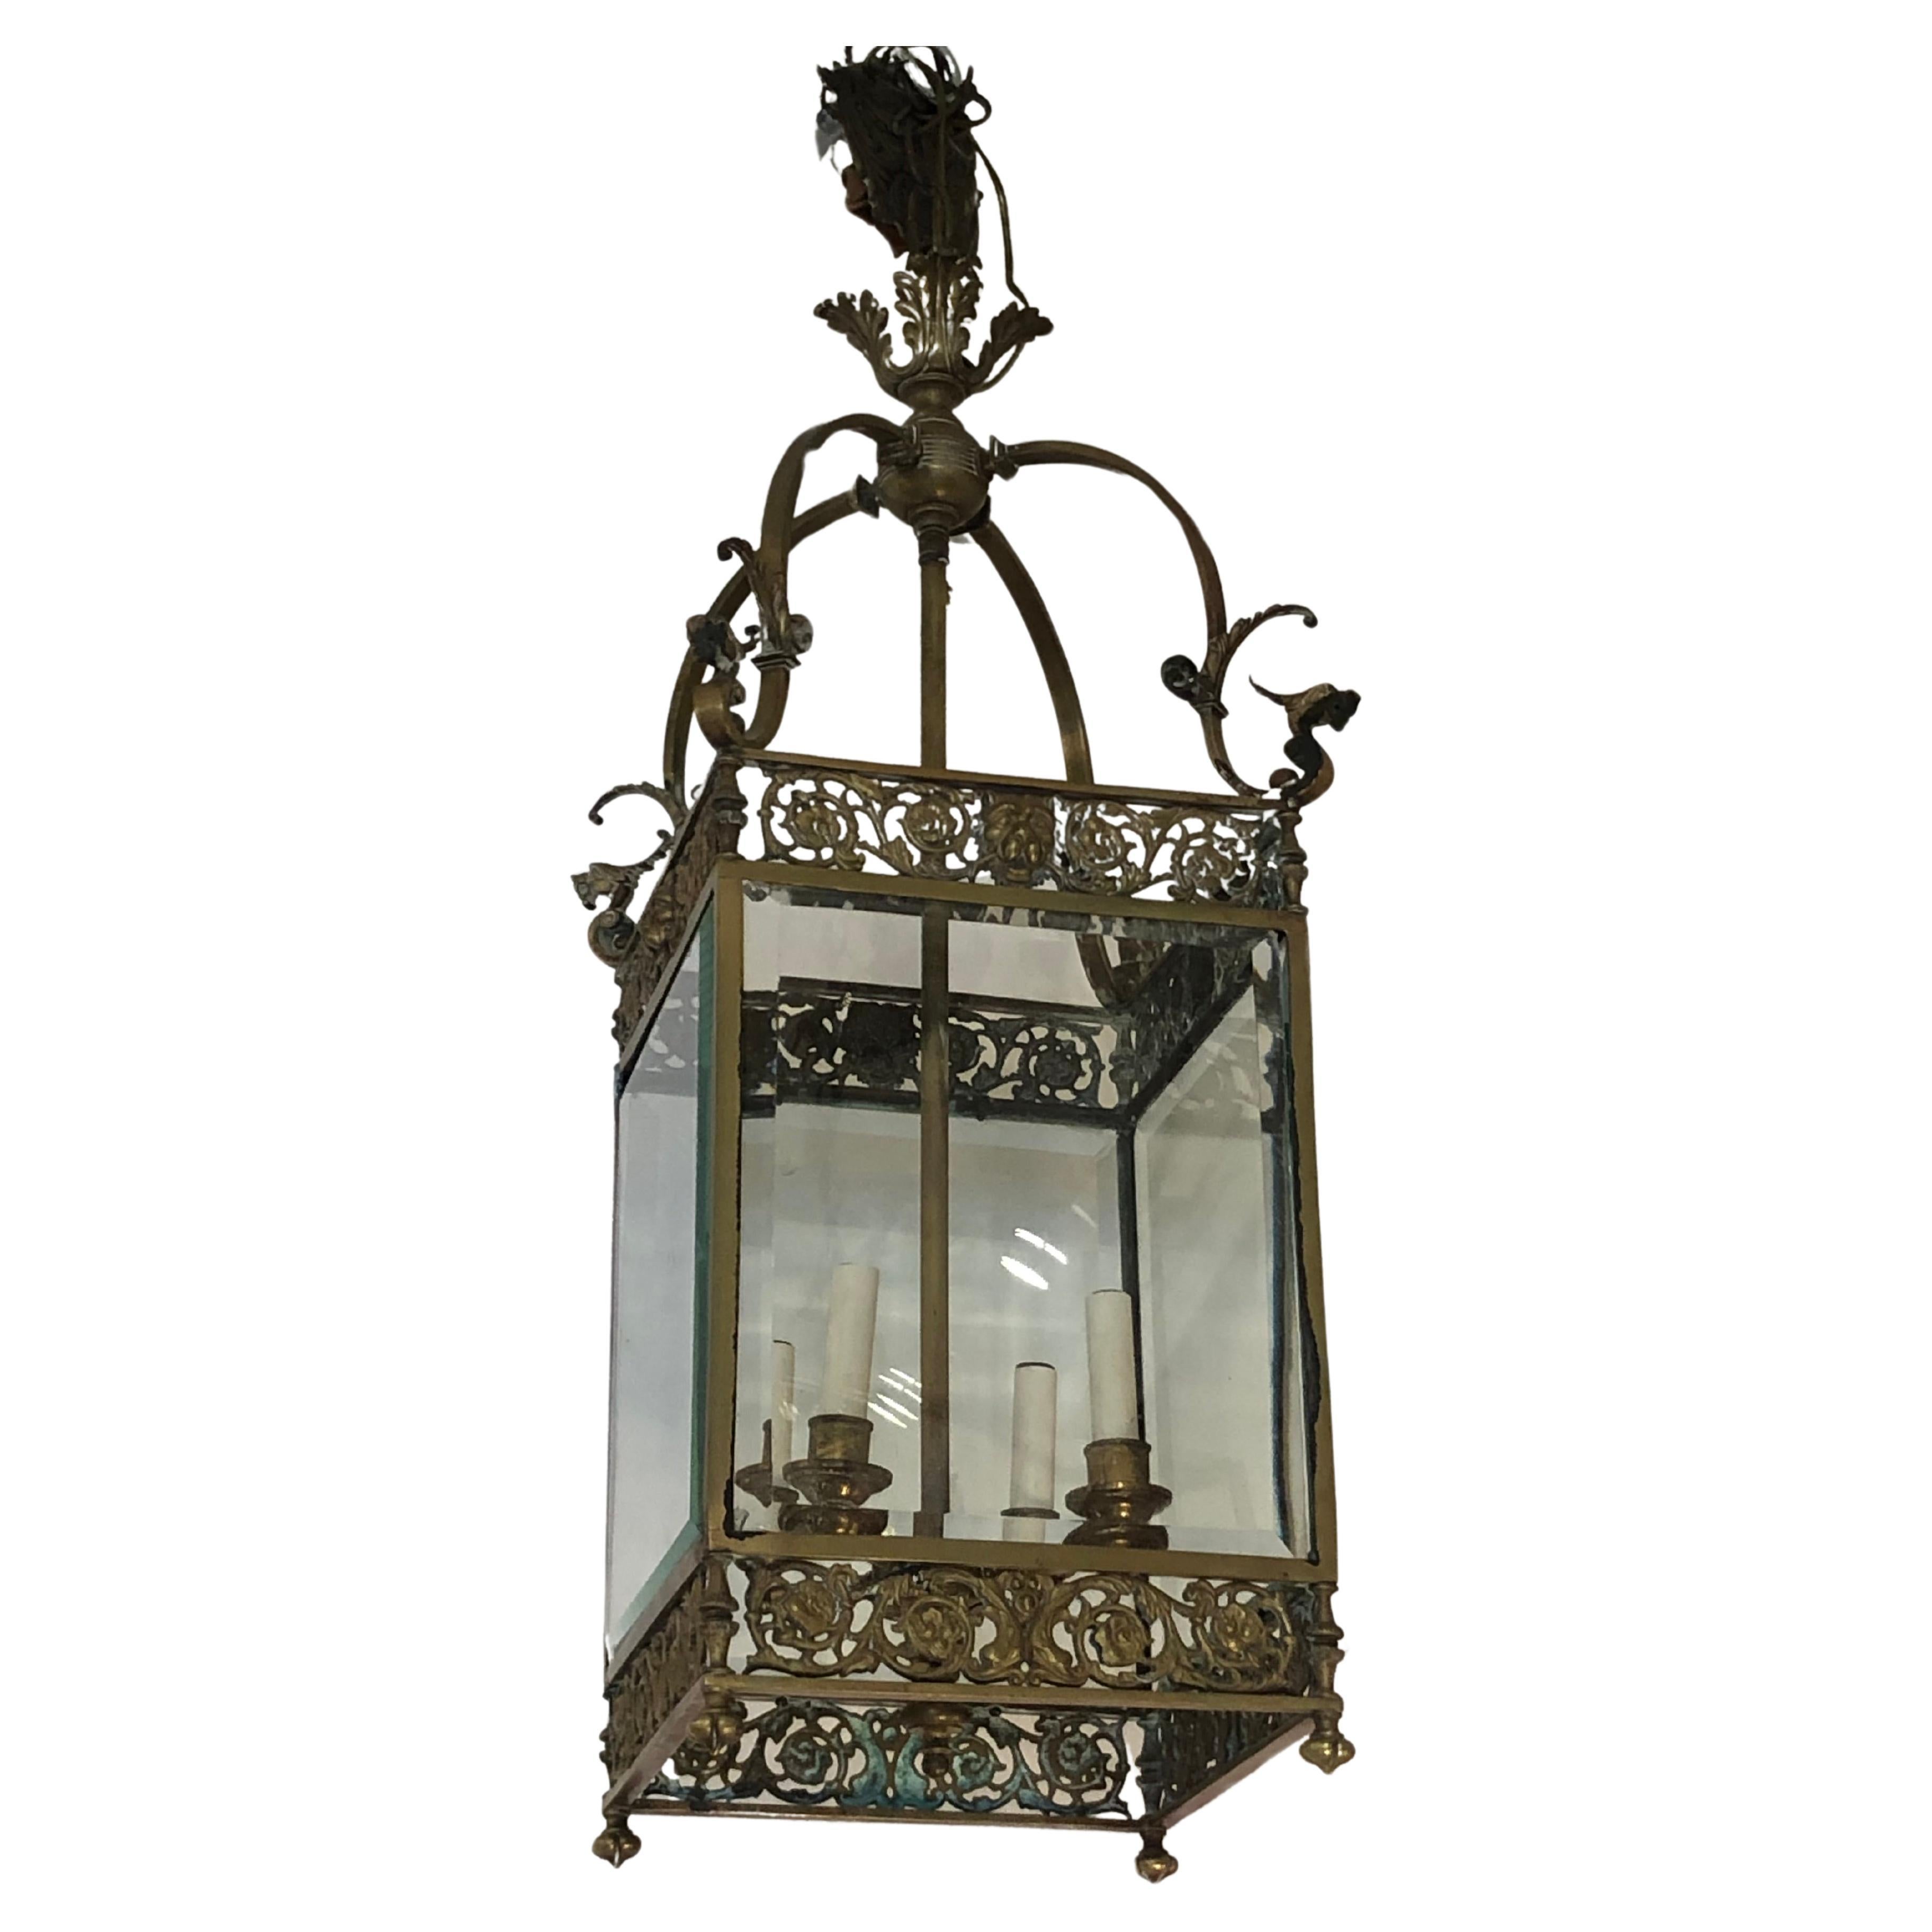 Antique English Bronze Regency Lantern Chandelier with Lion Heads and Griffins For Sale